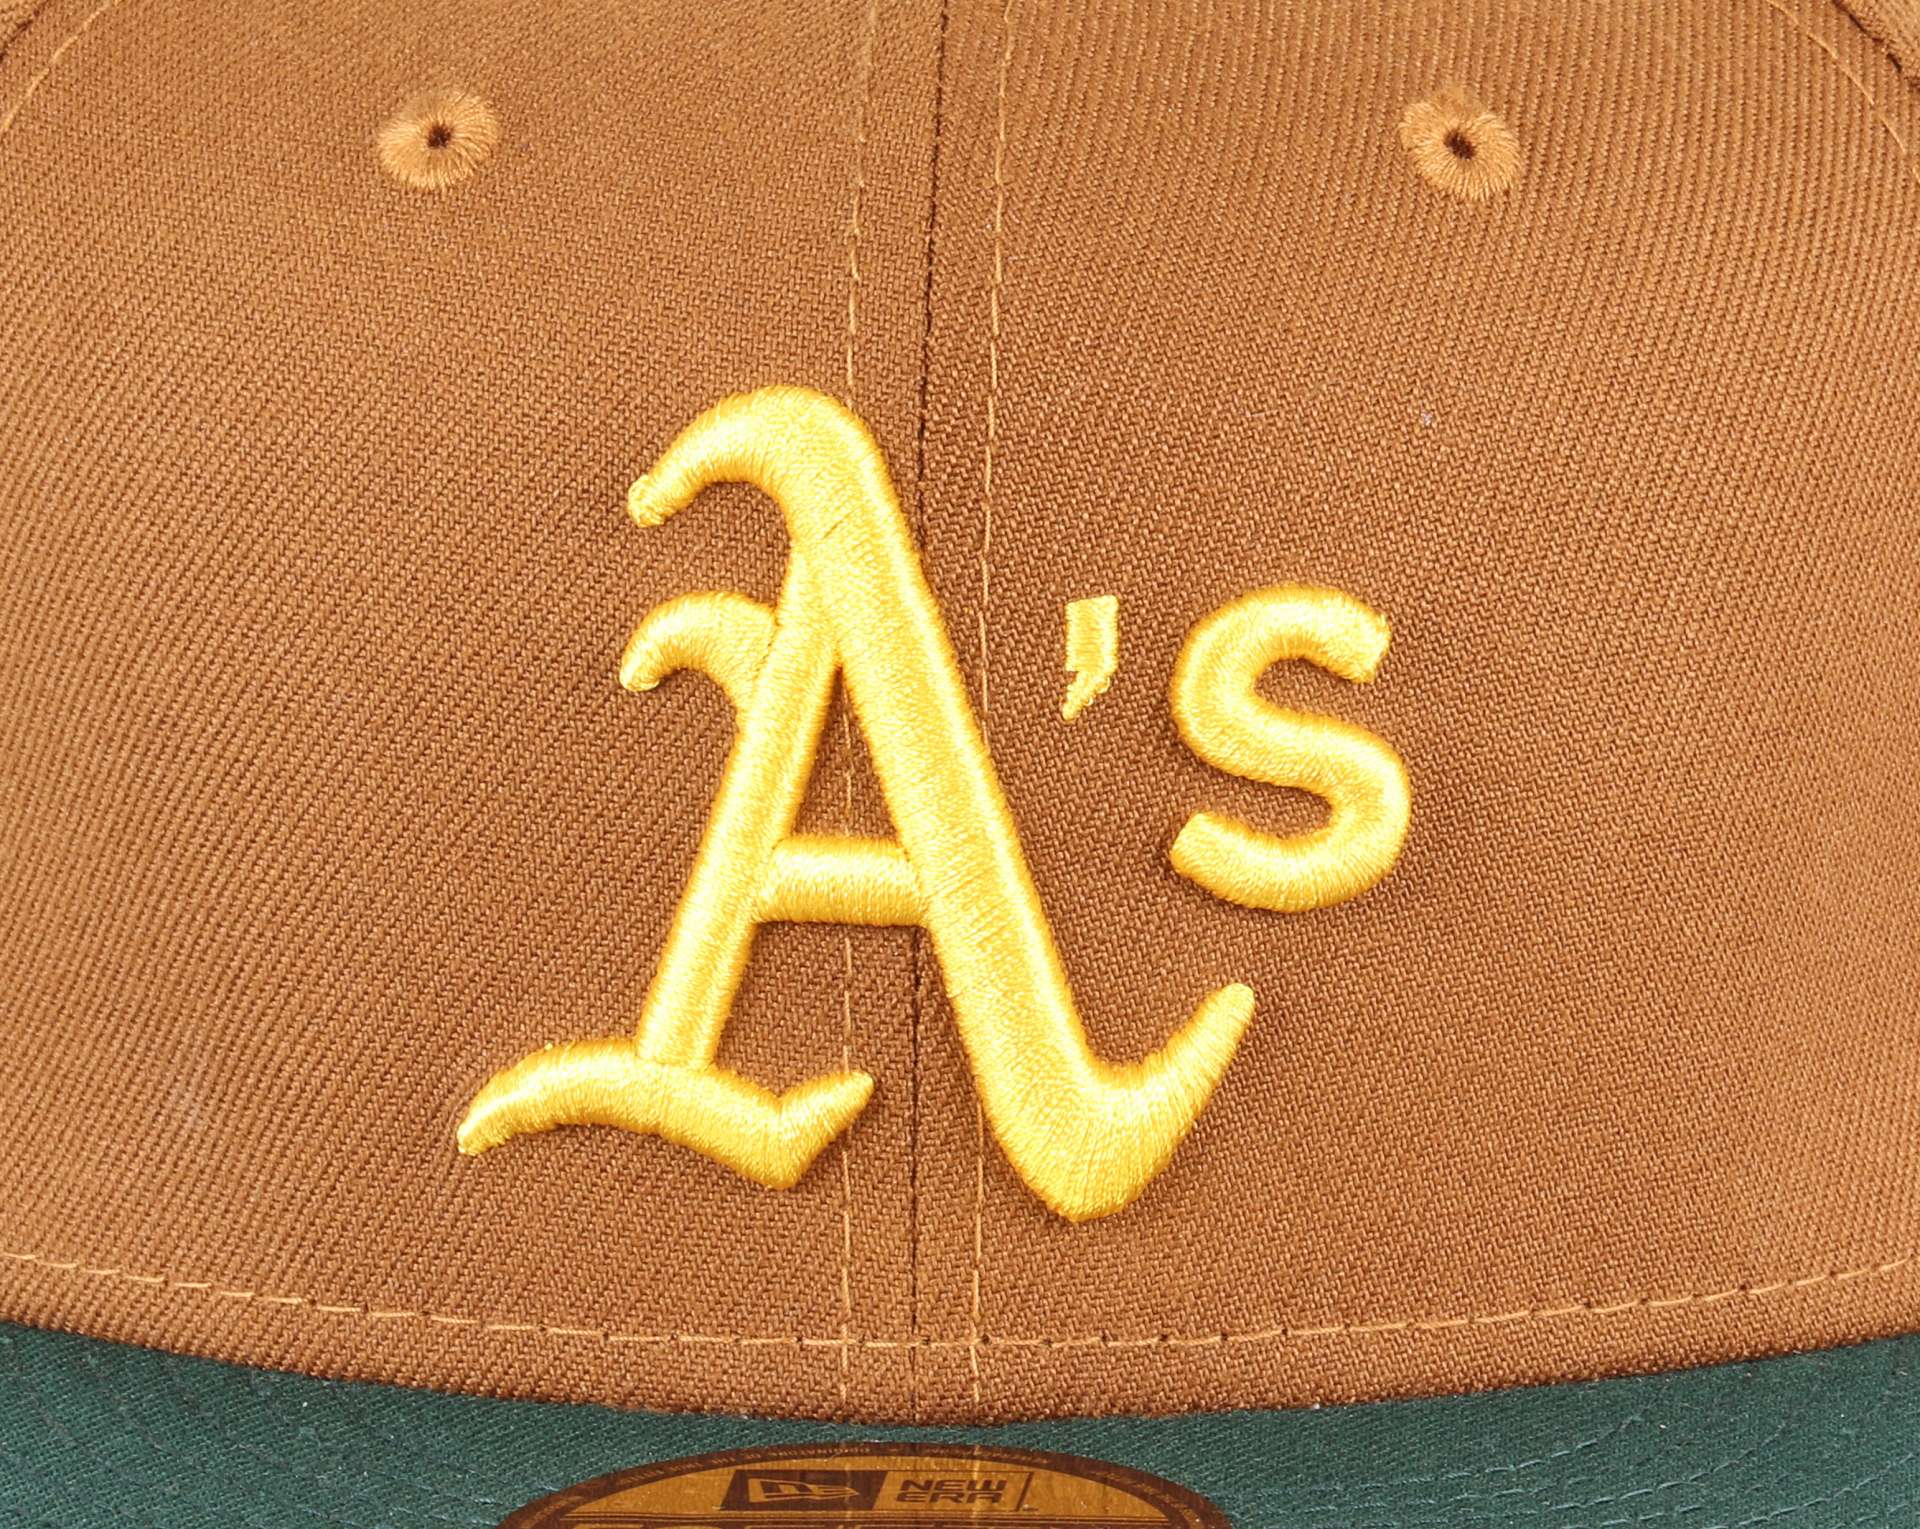 Oakland Athletics MLB Cooperstown 40th Anniversary Sidepatch Peanut 59Fifty Basecap New Era